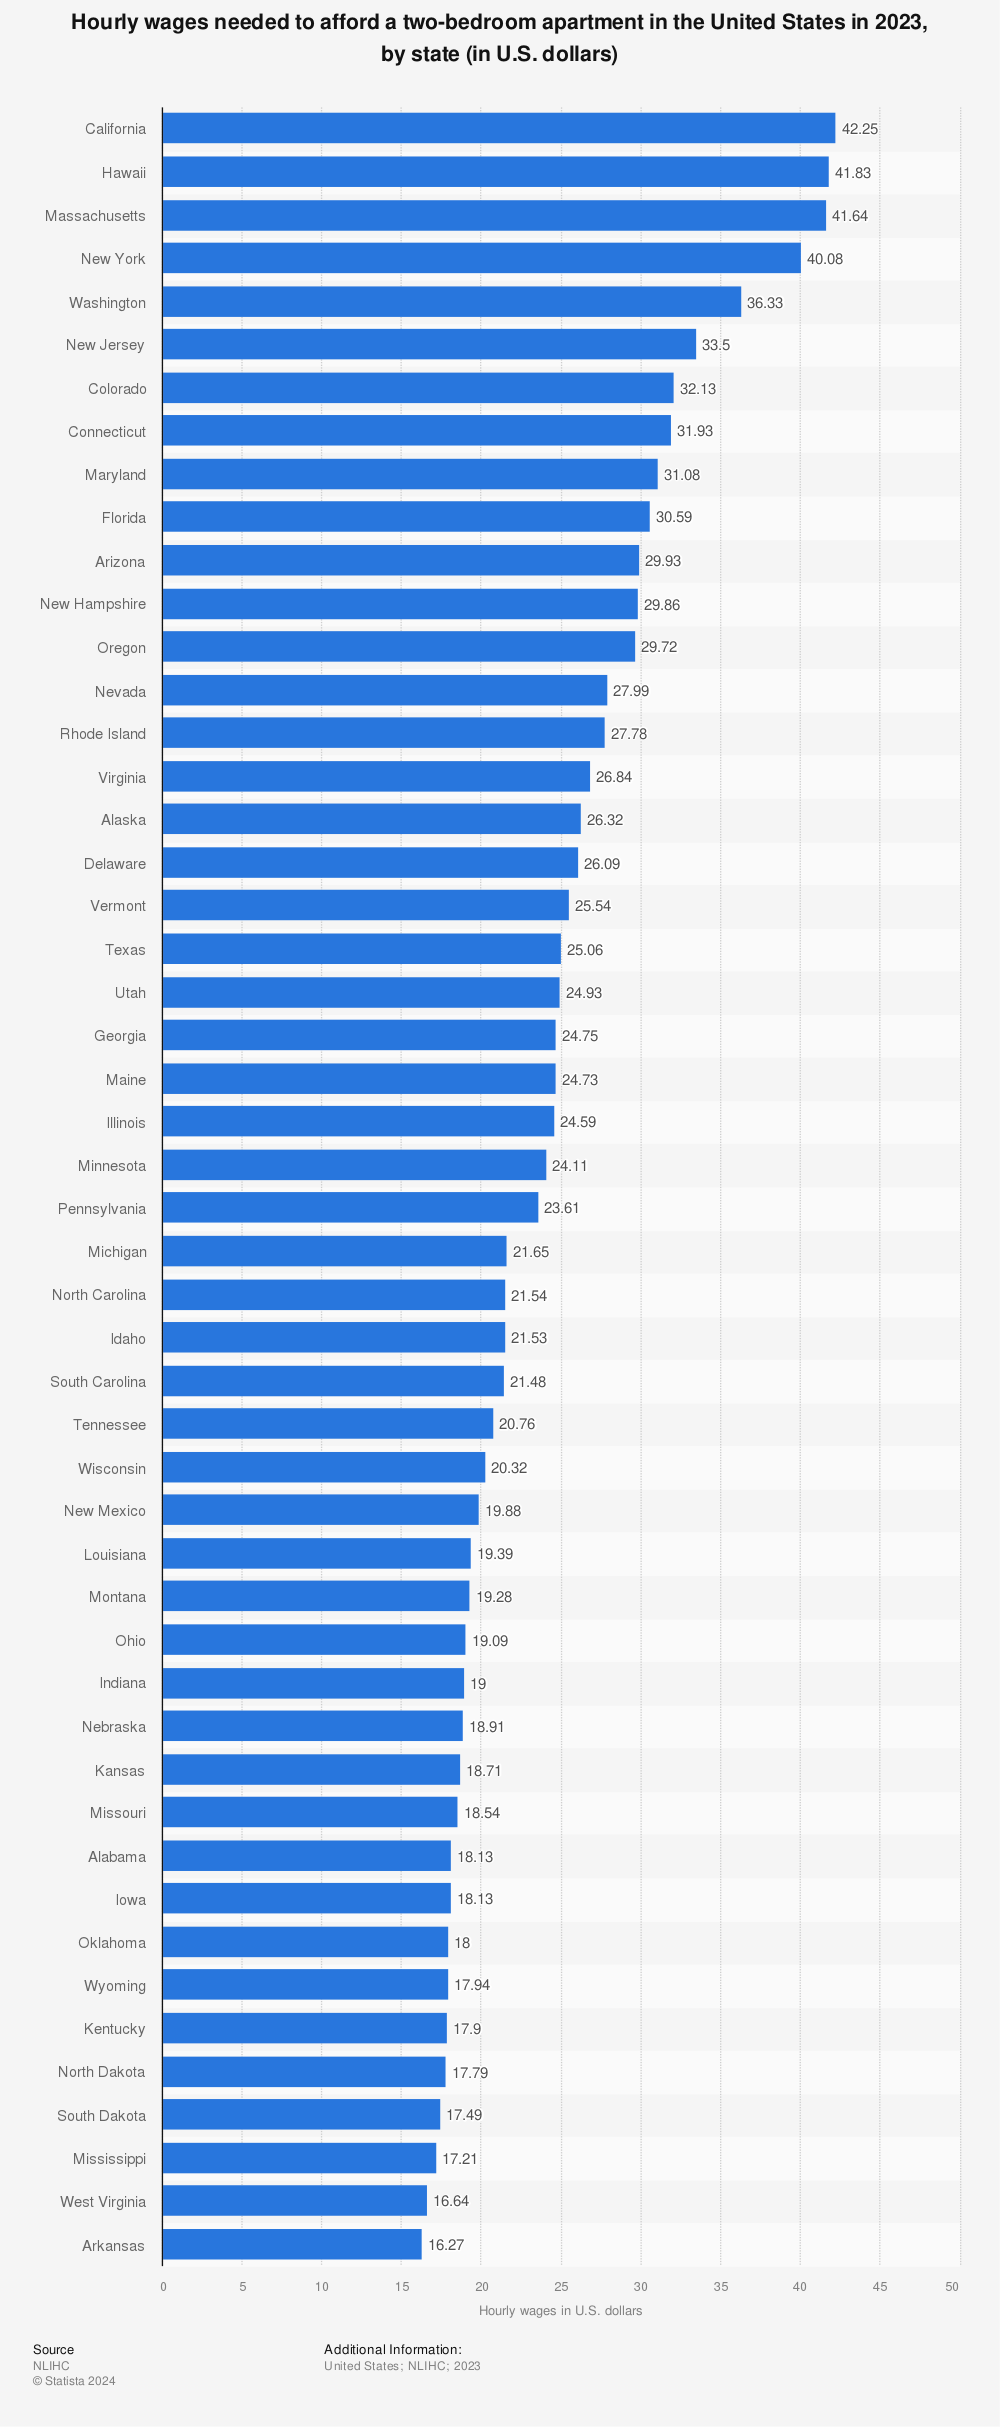 Statistic: Hourly wages needed to afford a two-bedroom apartment in the United States in 2022, by state (in U.S. dollars) | Statista